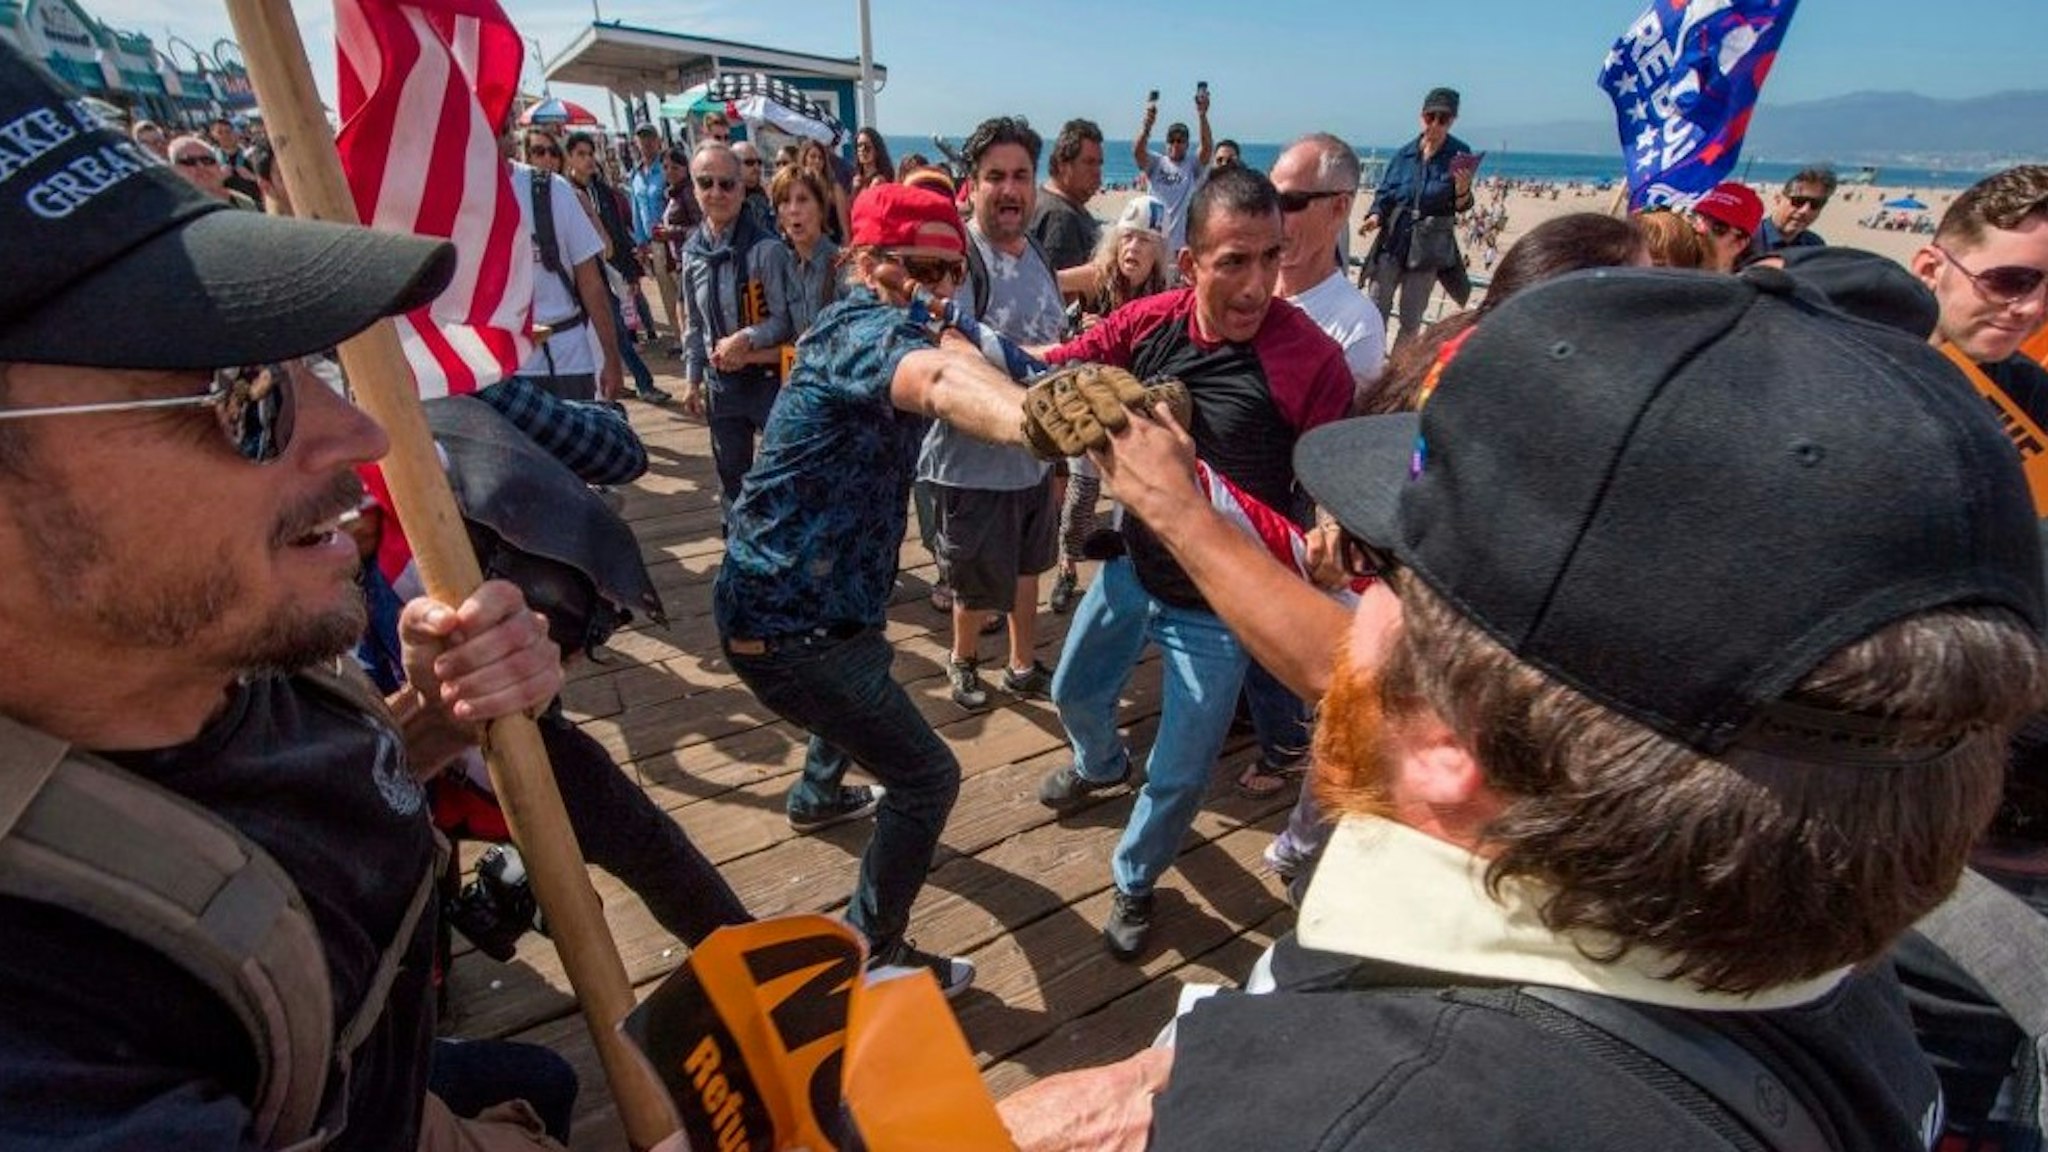 Supporters of President Donald Trump (L) clash with anti-Trump protesters during a rally against his policies in Santa Monica, California on October 19, 2019. - Several people were arrested after fighting and pepper spray was used by the opposing groups.